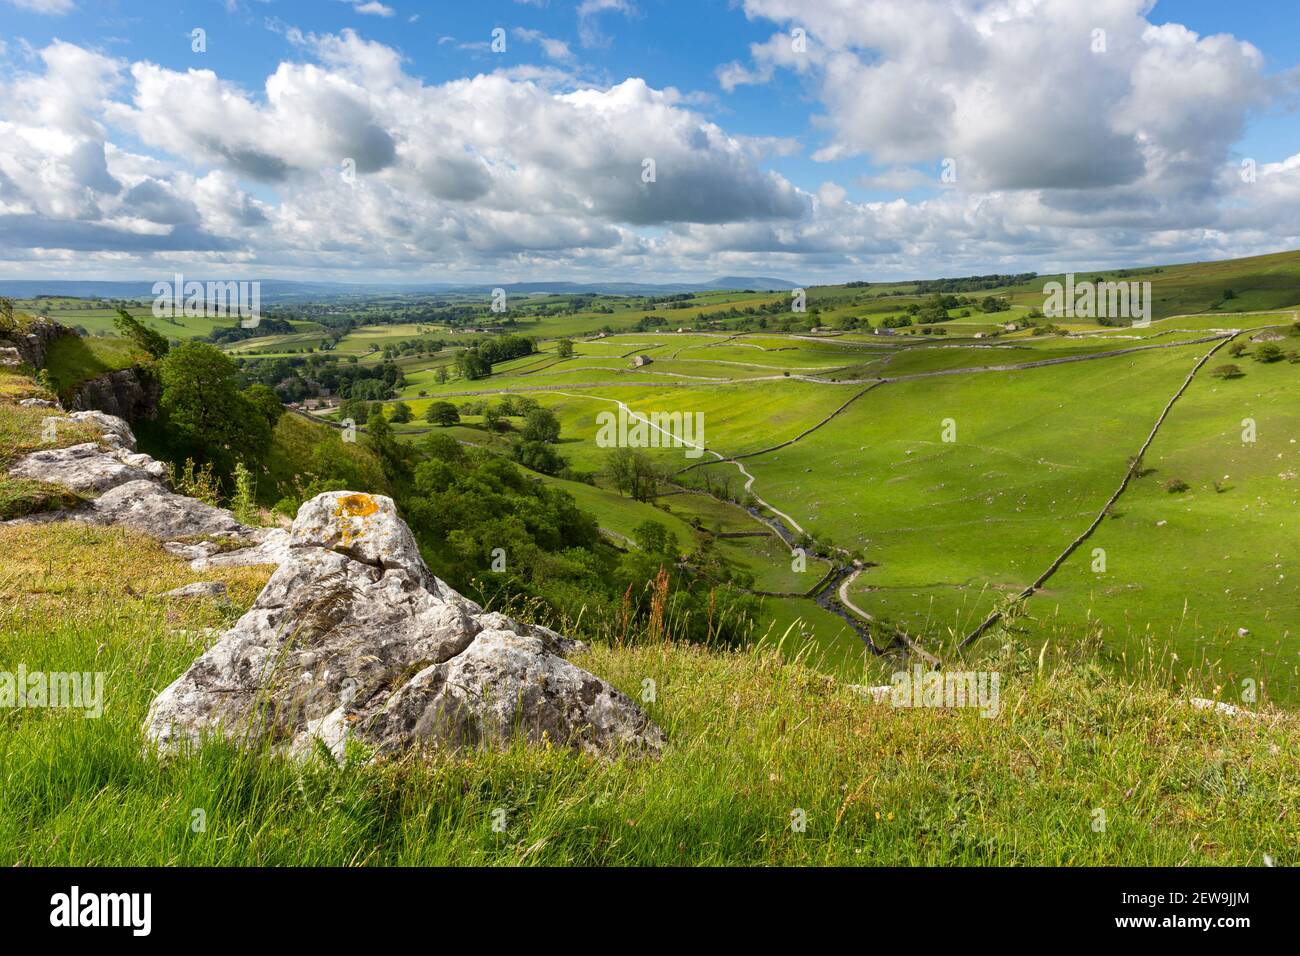 Stunning View over Malham from Malham Cove in Summer overlooking ancient green fields and field borders, Yorkshire Dales Stock Photo